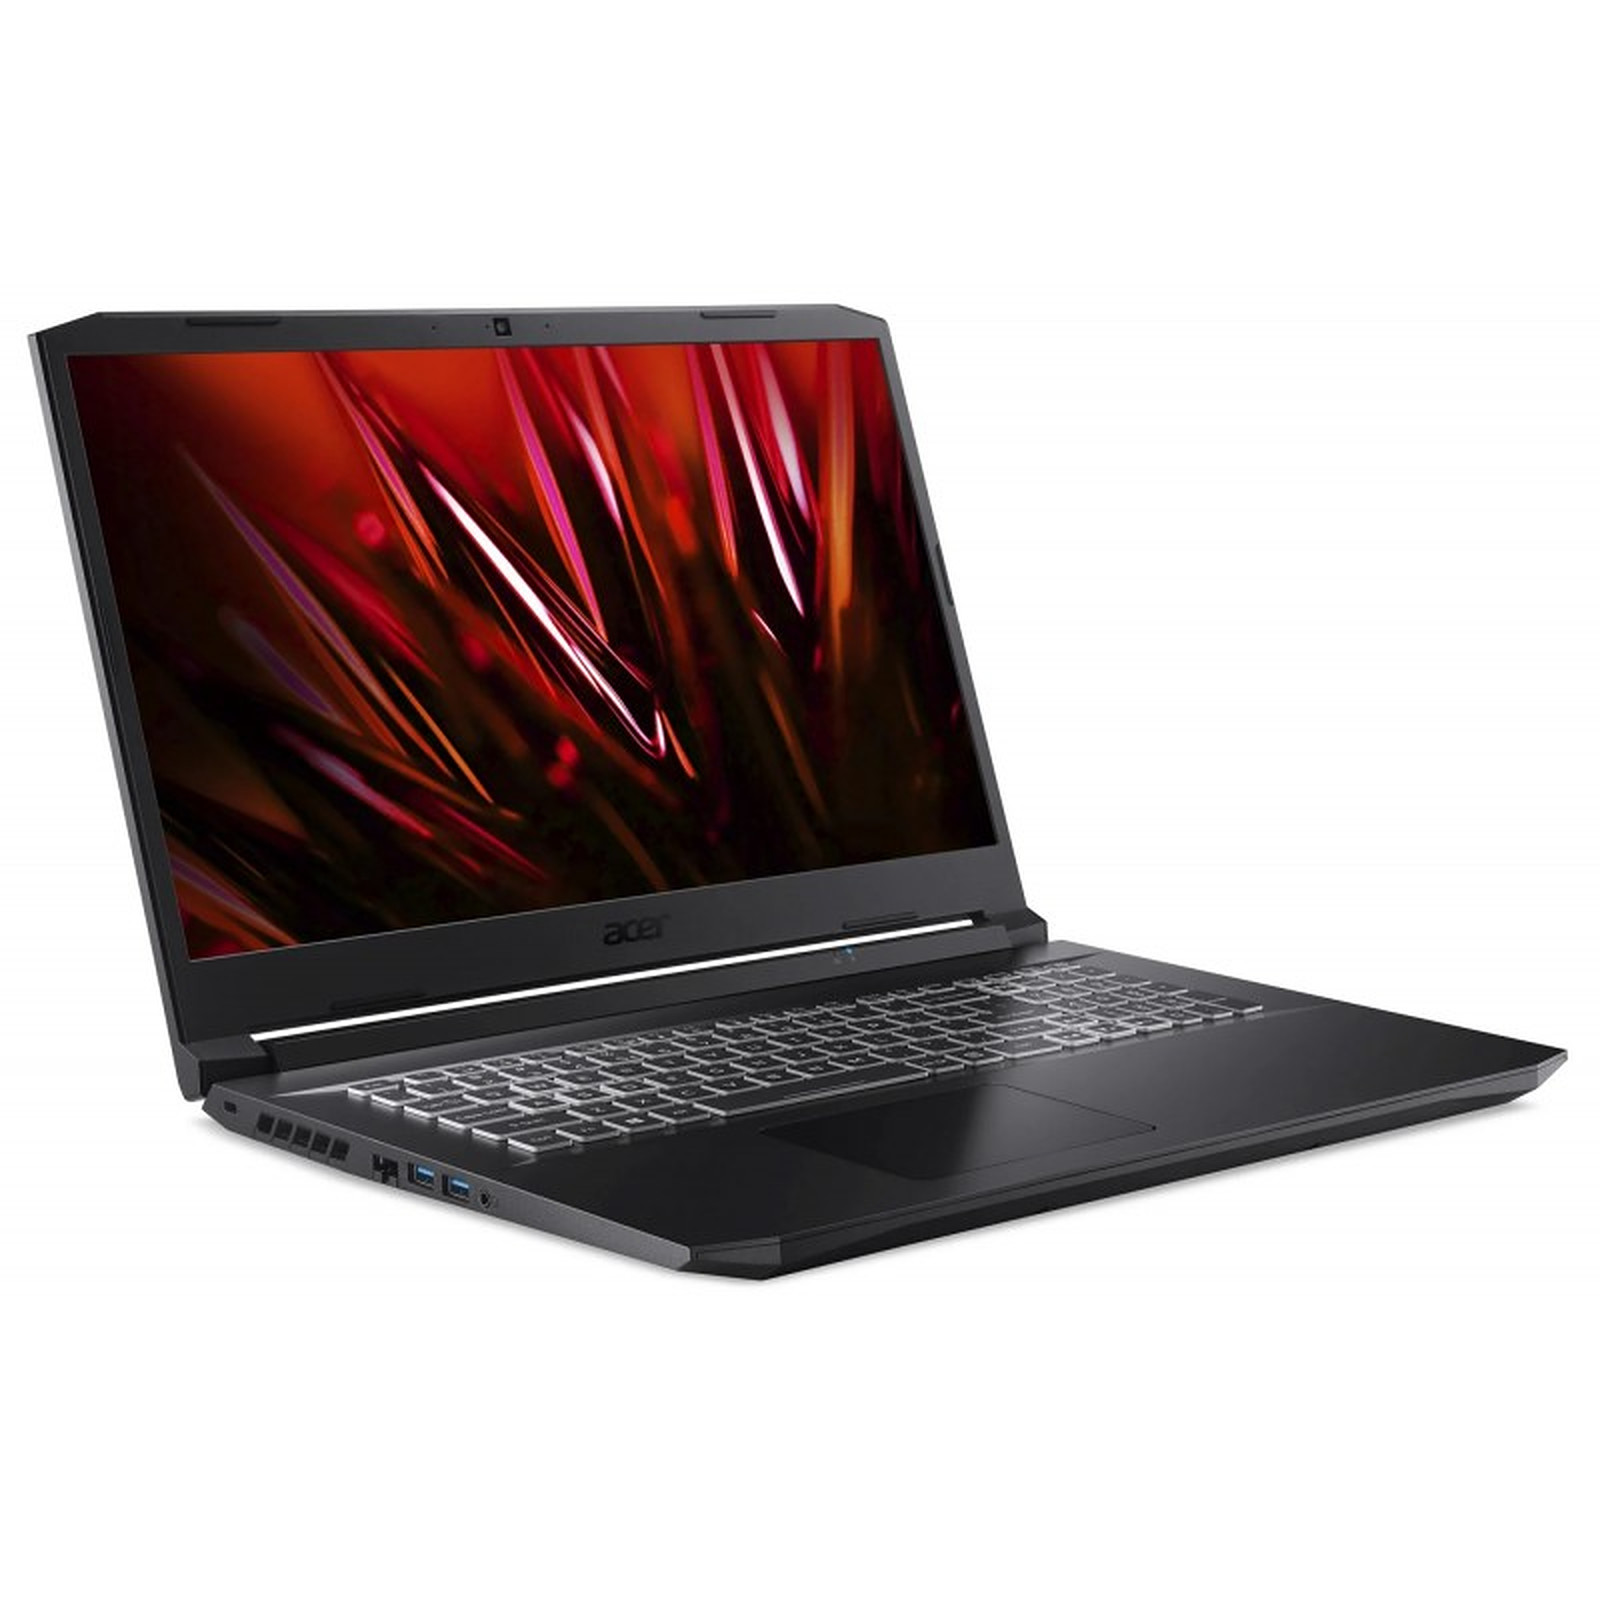 Acer Nitro 5 AN517-41-R3J6 (NH.QBHEF.002) · Reconditionne - PC portable reconditionne Acer